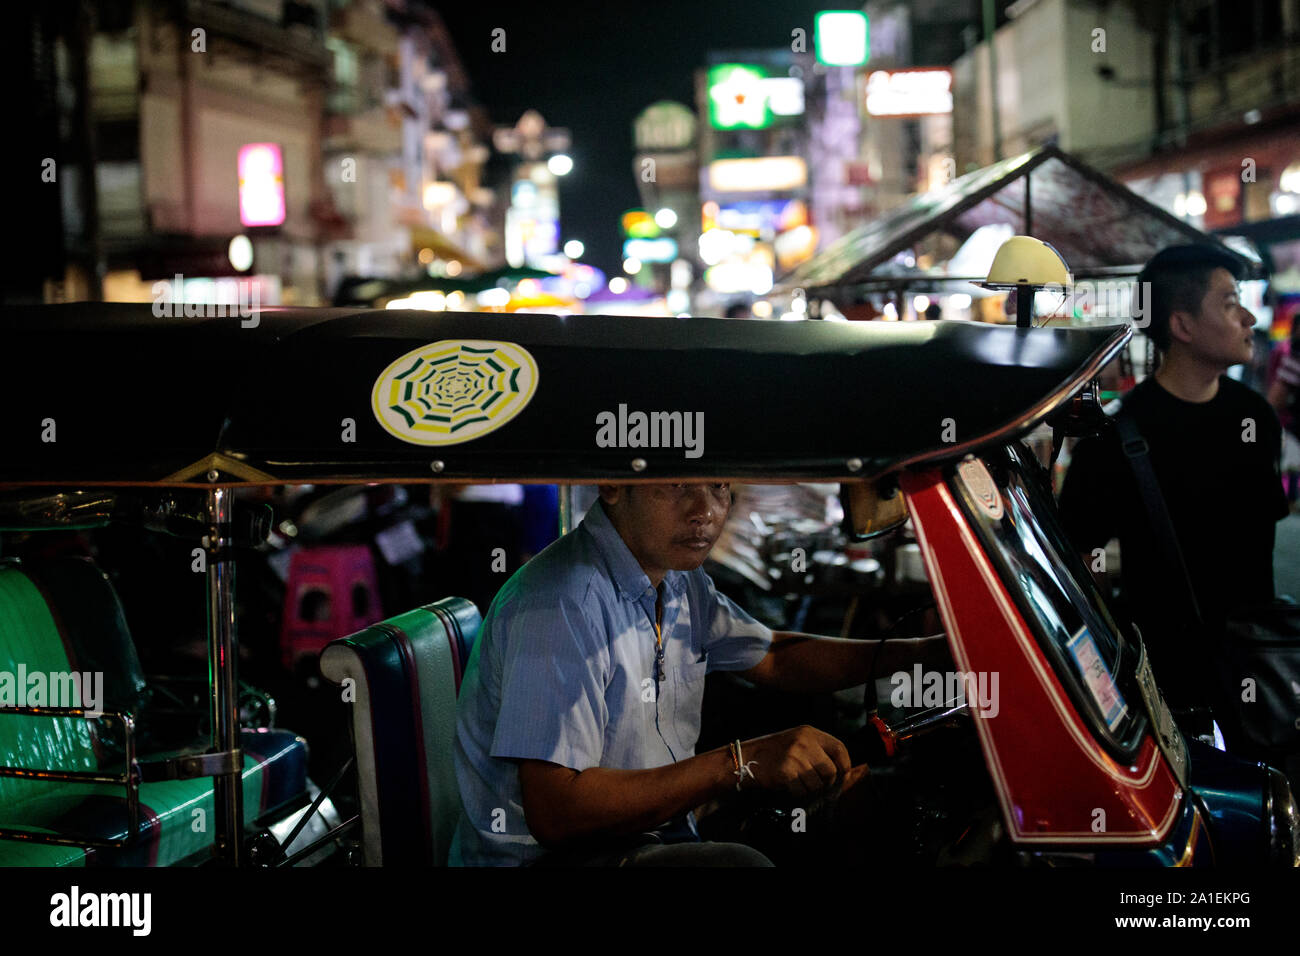 BANGKOK, THAILAND: A tuk tuk driver sits in his vehicle at the end of Khao San Road in Bangkok, Thailand on August 27th, 2019. Bangkok's bustling Khao San Road - a strip famous among tourists for its budget hostels, street food and market stalls - is set for a £1.28M face lift in October this year.   For many backpackers Khao San is the starting point for their travels across Southeast Asia. It is a place to meet fellow travellers, dine out on pad thai served from street carts, sip cocktails from small brightly-coloured buckets or perhaps get an ill-advised tattoo.   A place both garish and ch Stock Photo